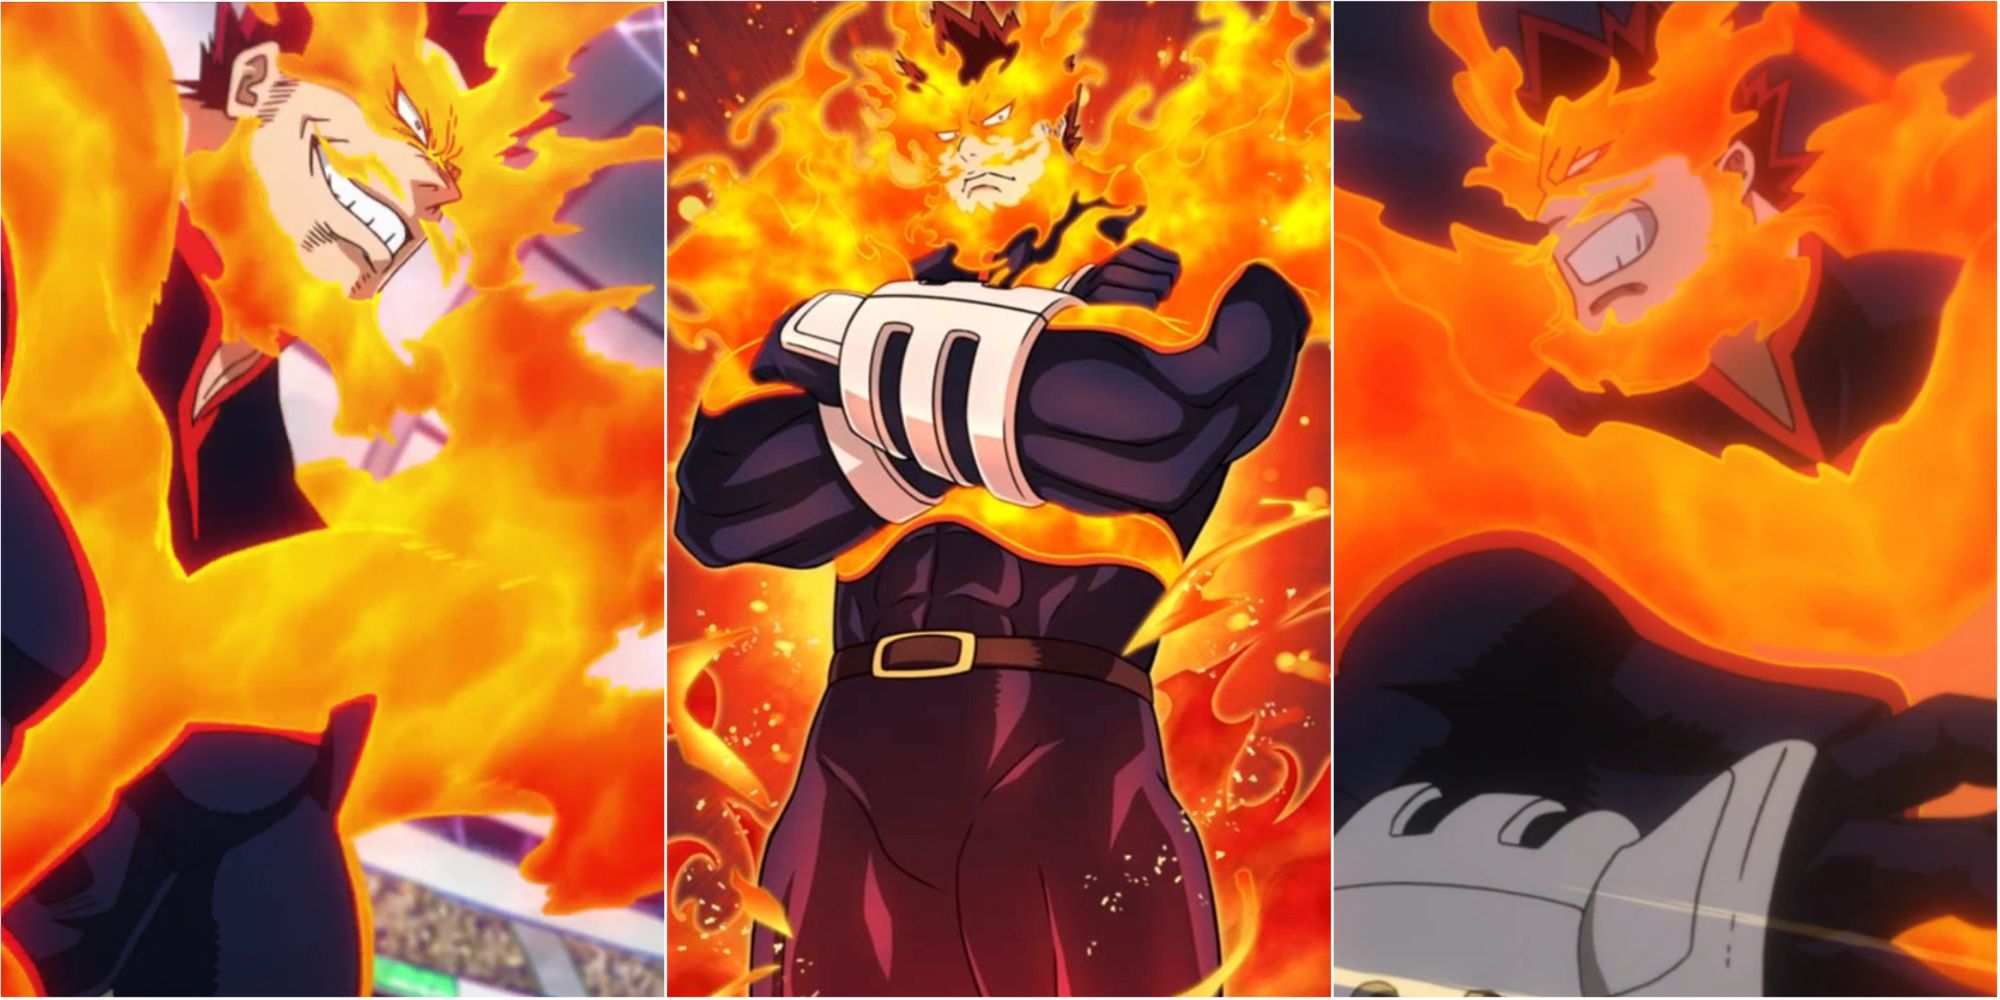 Endeavor Power Shot - anime characters with fire powers - Image